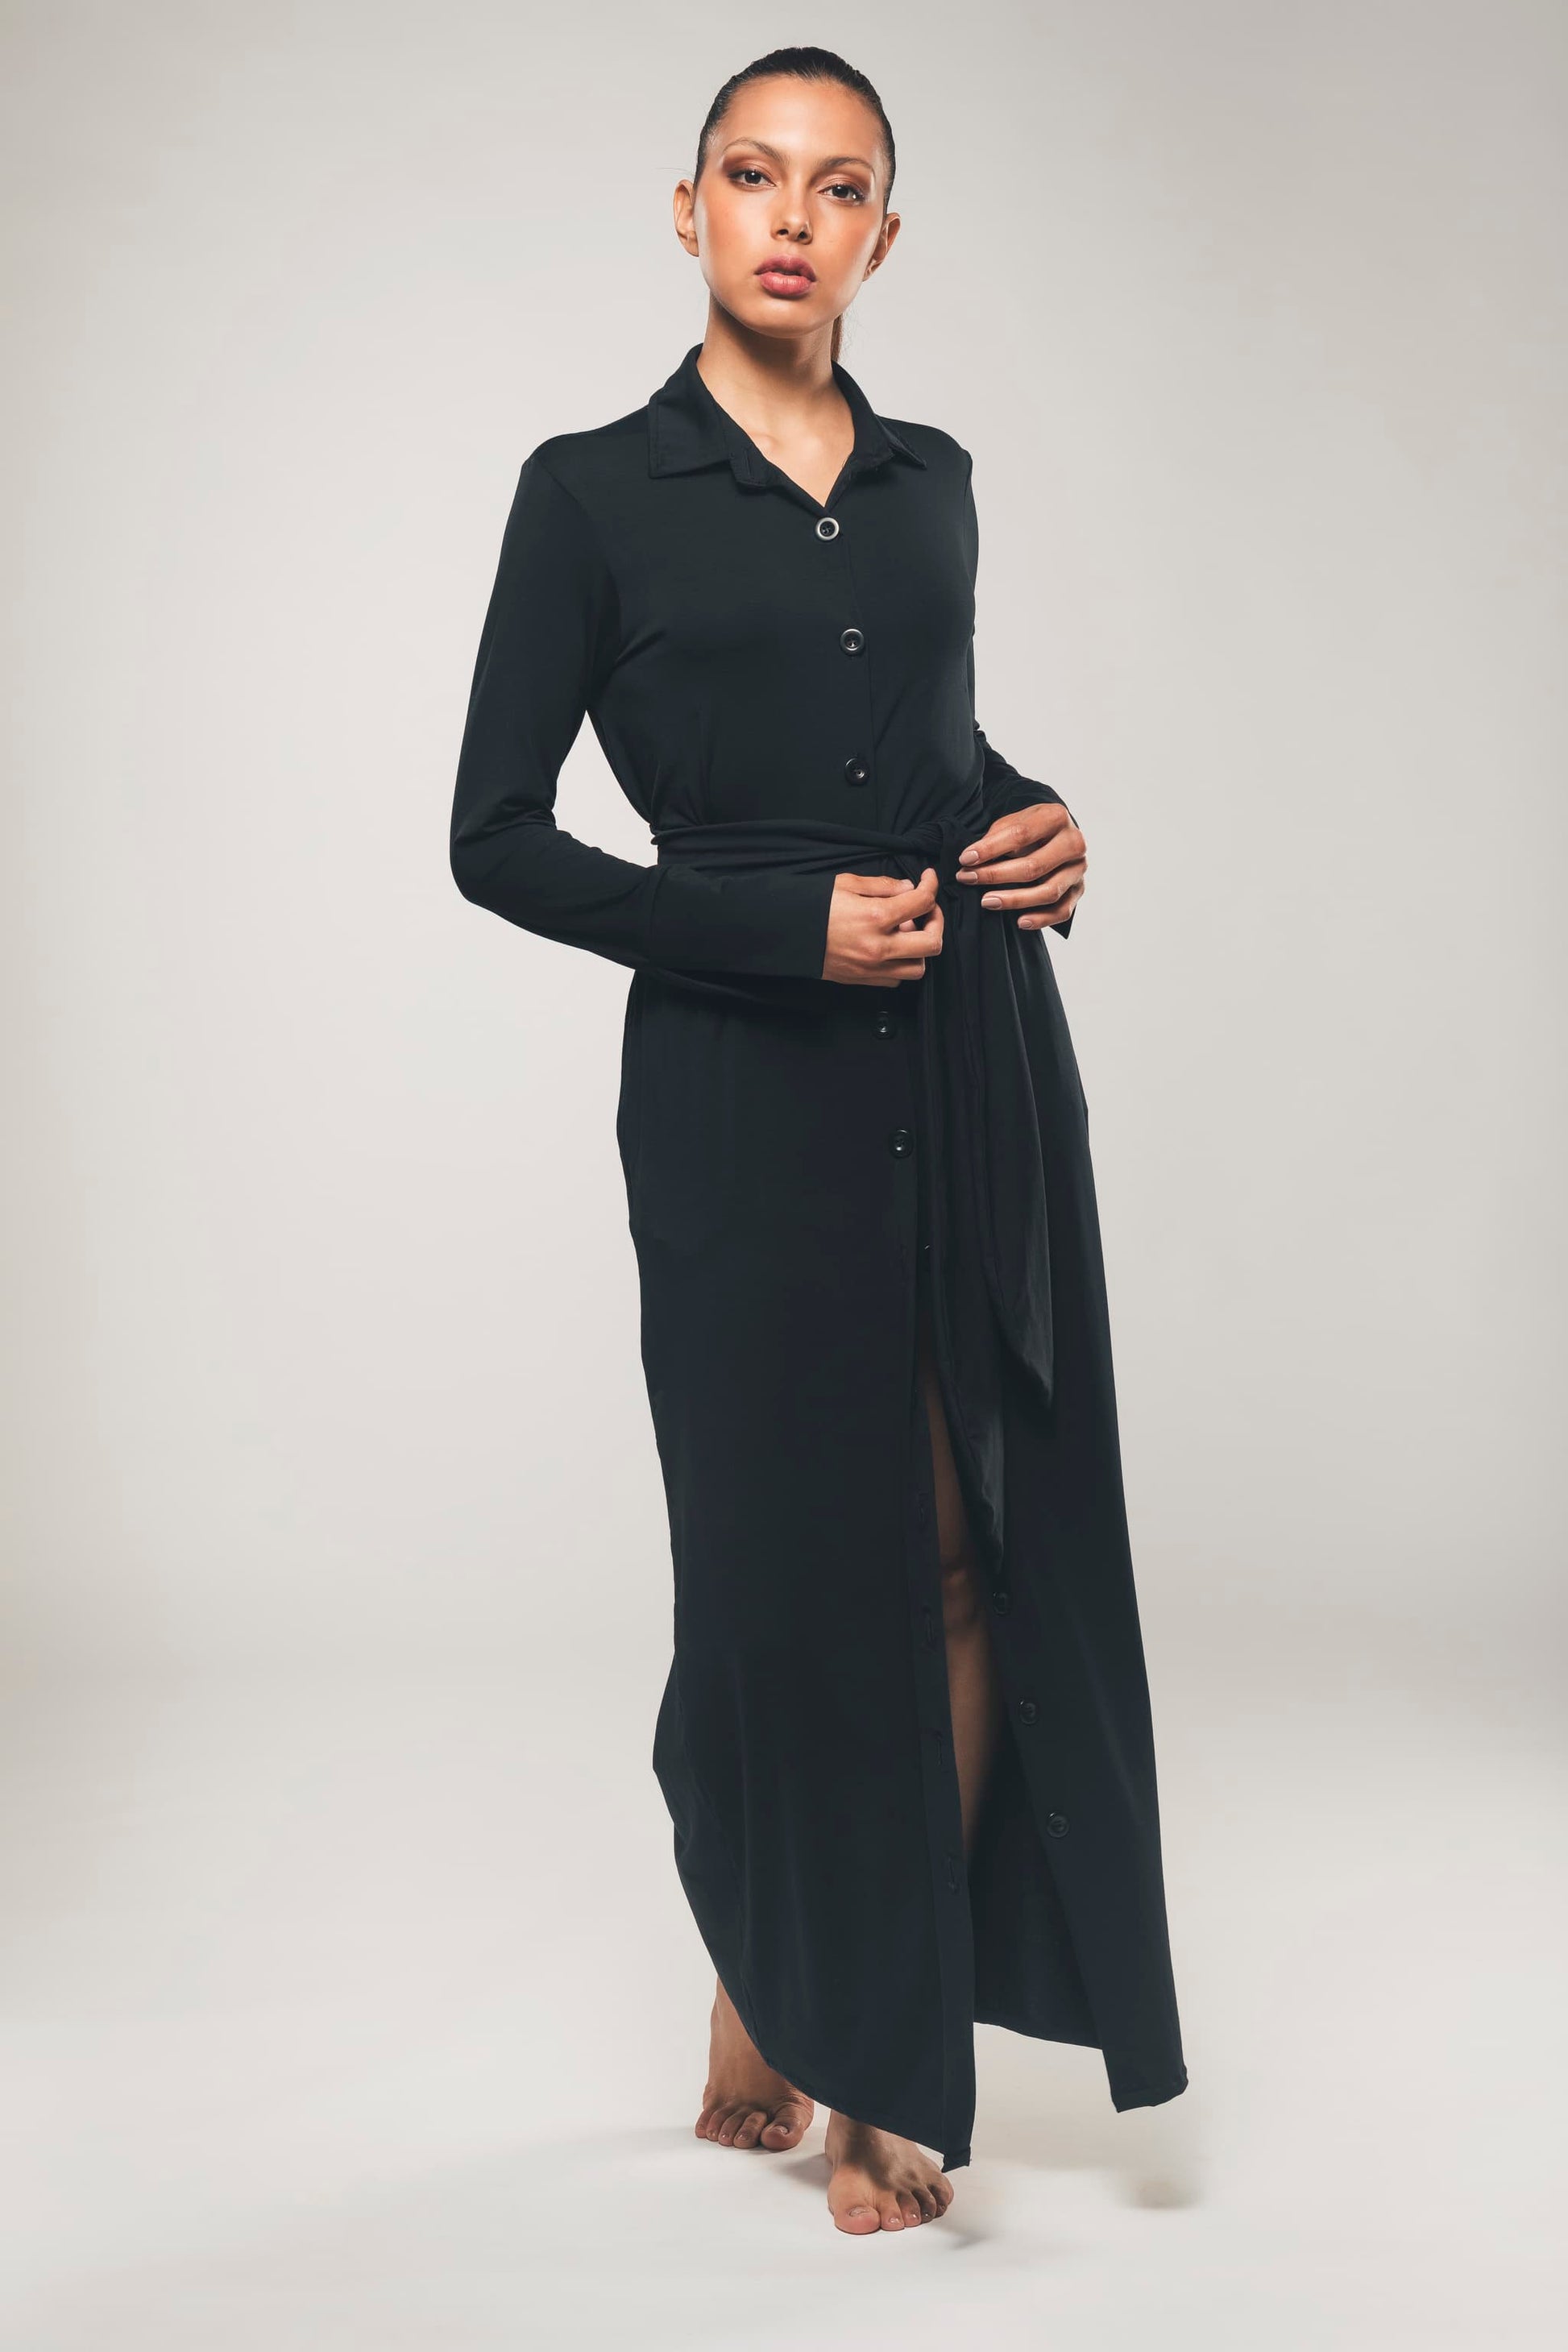 Image of organic lyocell maxi shirt dress in black made by Organique. 